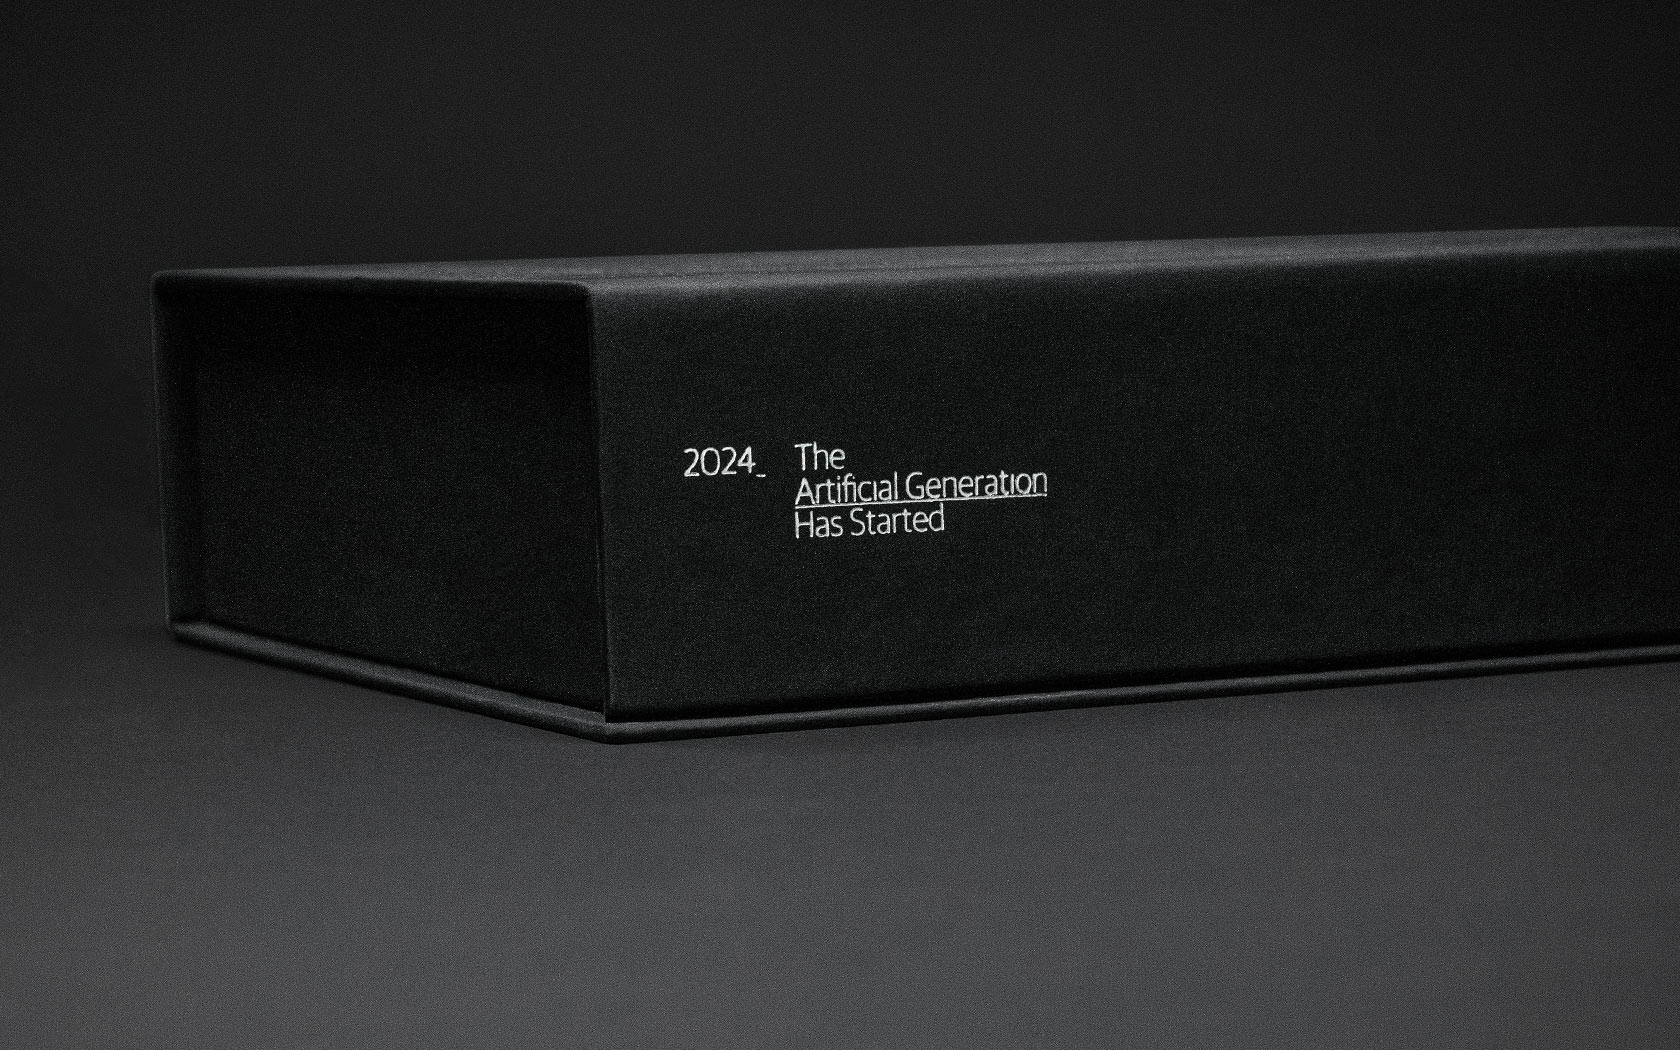 GFH Calendar 2024. Packaging spine with text in silver foil treatment